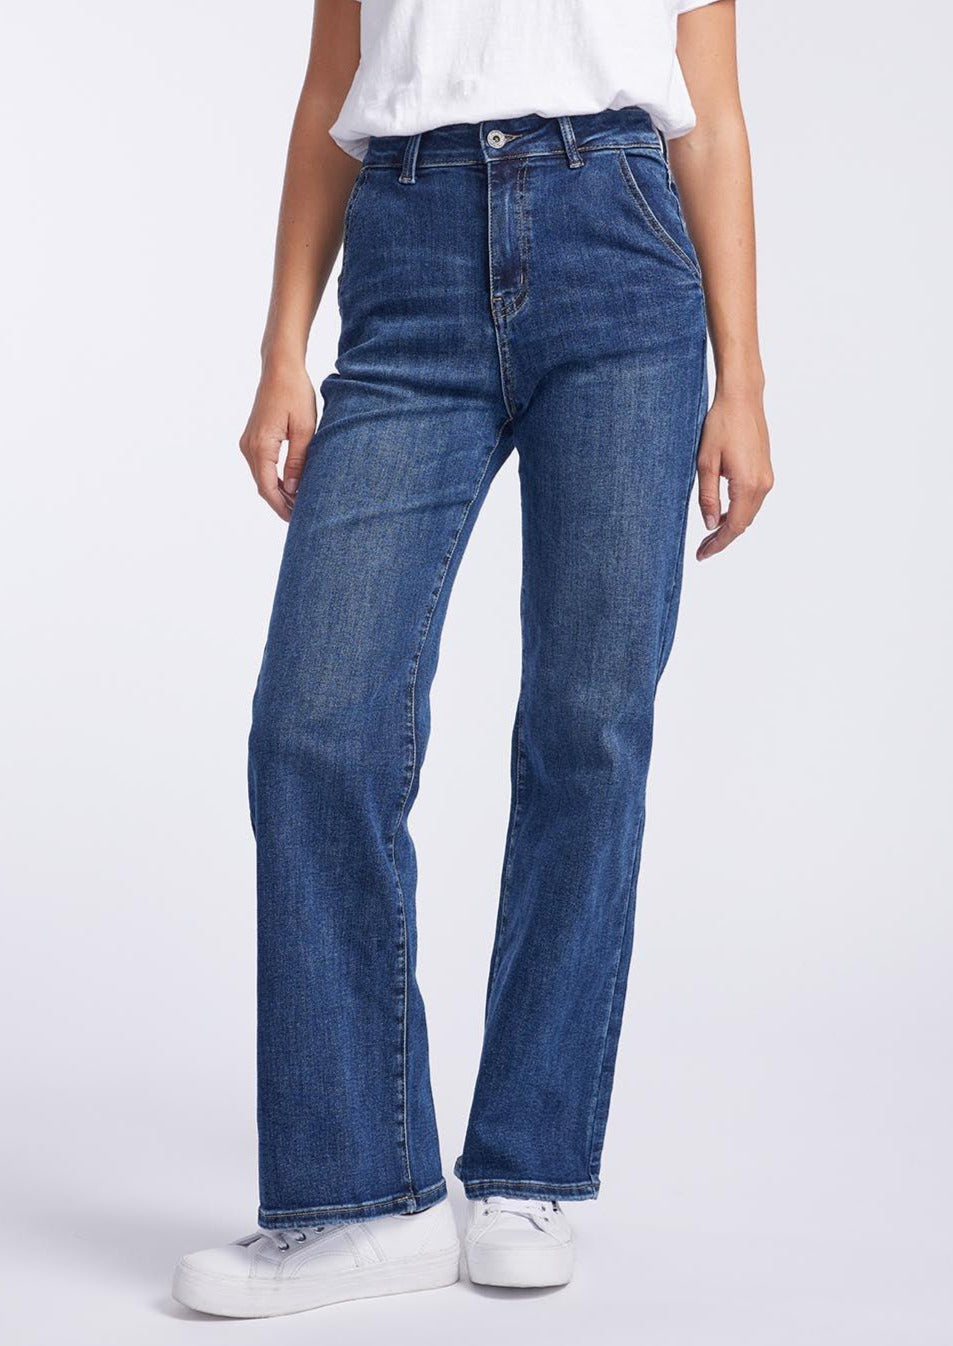 <h3 style="font-weight: 400;"><strong>Shirley Jean - Denim, by Italian Star</strong></h3> <p>Effortlessly cool, the Shirley Jean from<span> Italian Star</span><span>&nbsp;</span>will elevate all your off-duty looks. Crafted from premium cotton blend denim, these stylish slim fit through the hips with a relaxed wide leg, angled side pockets and a versatile mid-blue wash. Pair with a t-shirt, blazer and sneakers for a polished everyday look